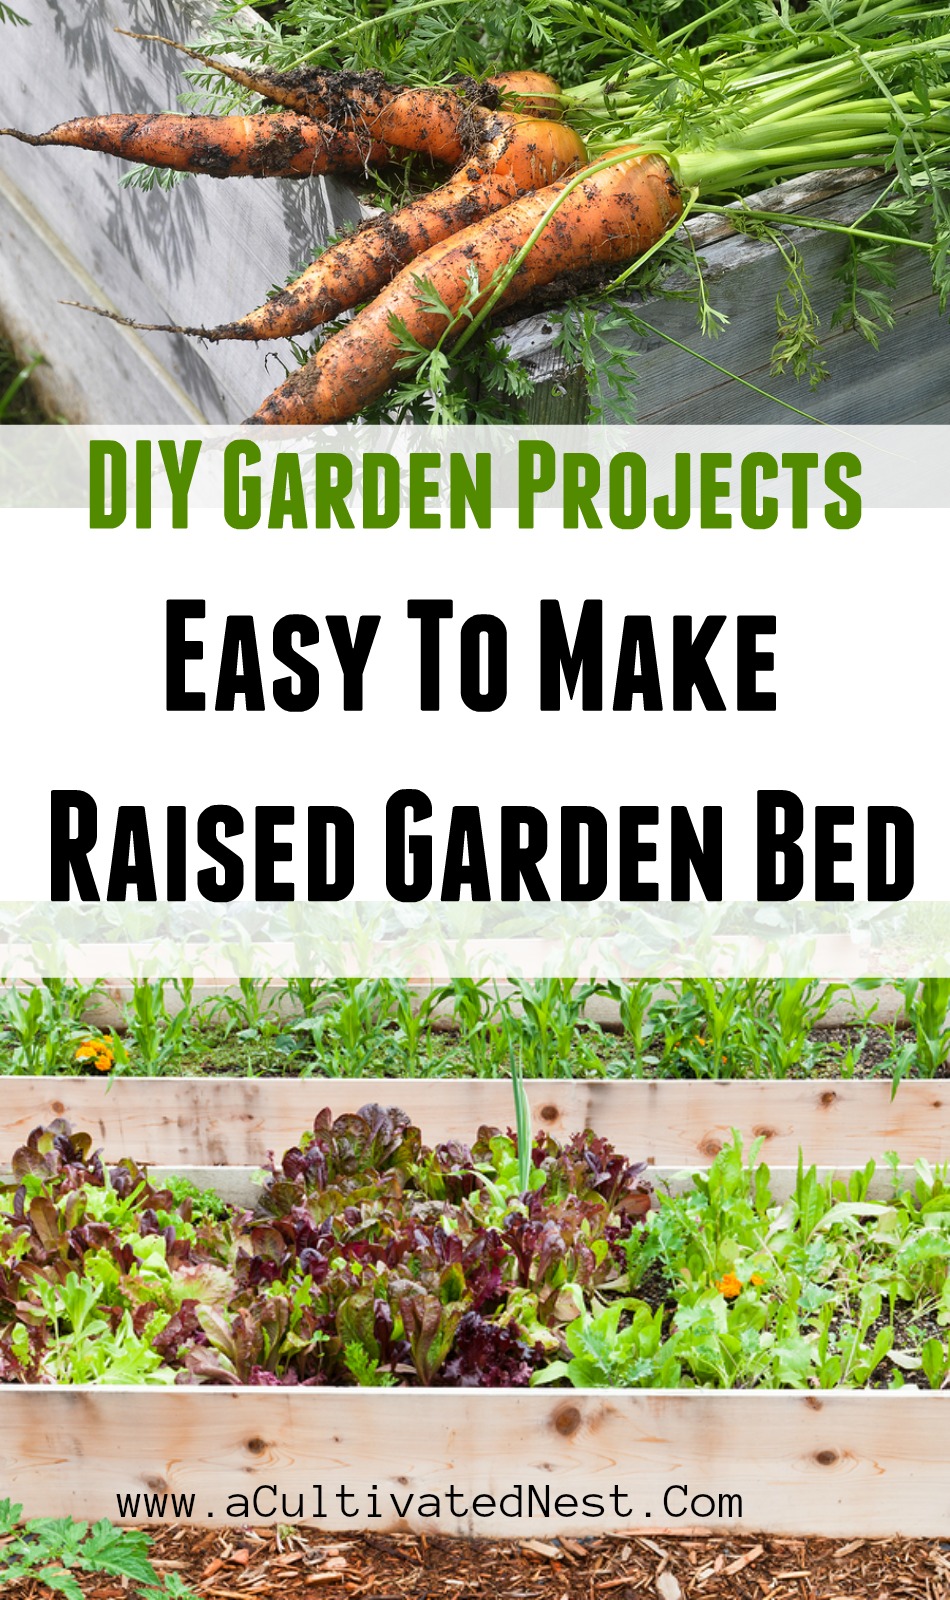 Easy DIY Raised Bed tutorial. They're easier on your knees and back than traditional beds and easier to weed & maintain! An easy step-by-step guide for raised garden beds. Vegetable gardening, how to make a raised bed #gardening #vegetablegardening #acultivatednest